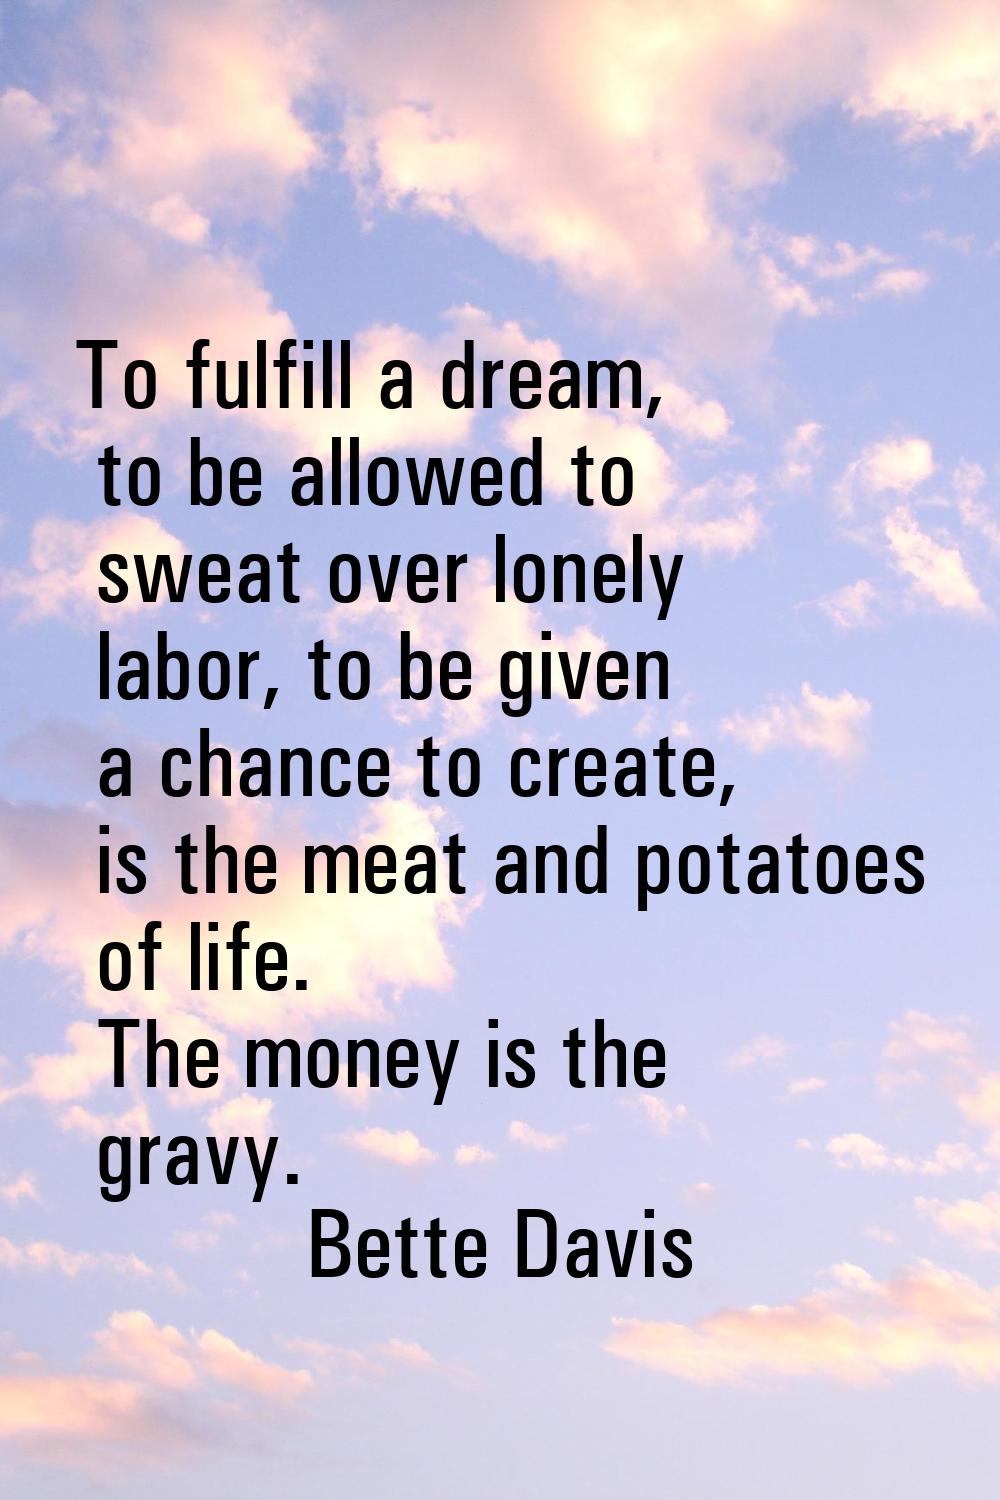 To fulfill a dream, to be allowed to sweat over lonely labor, to be given a chance to create, is th